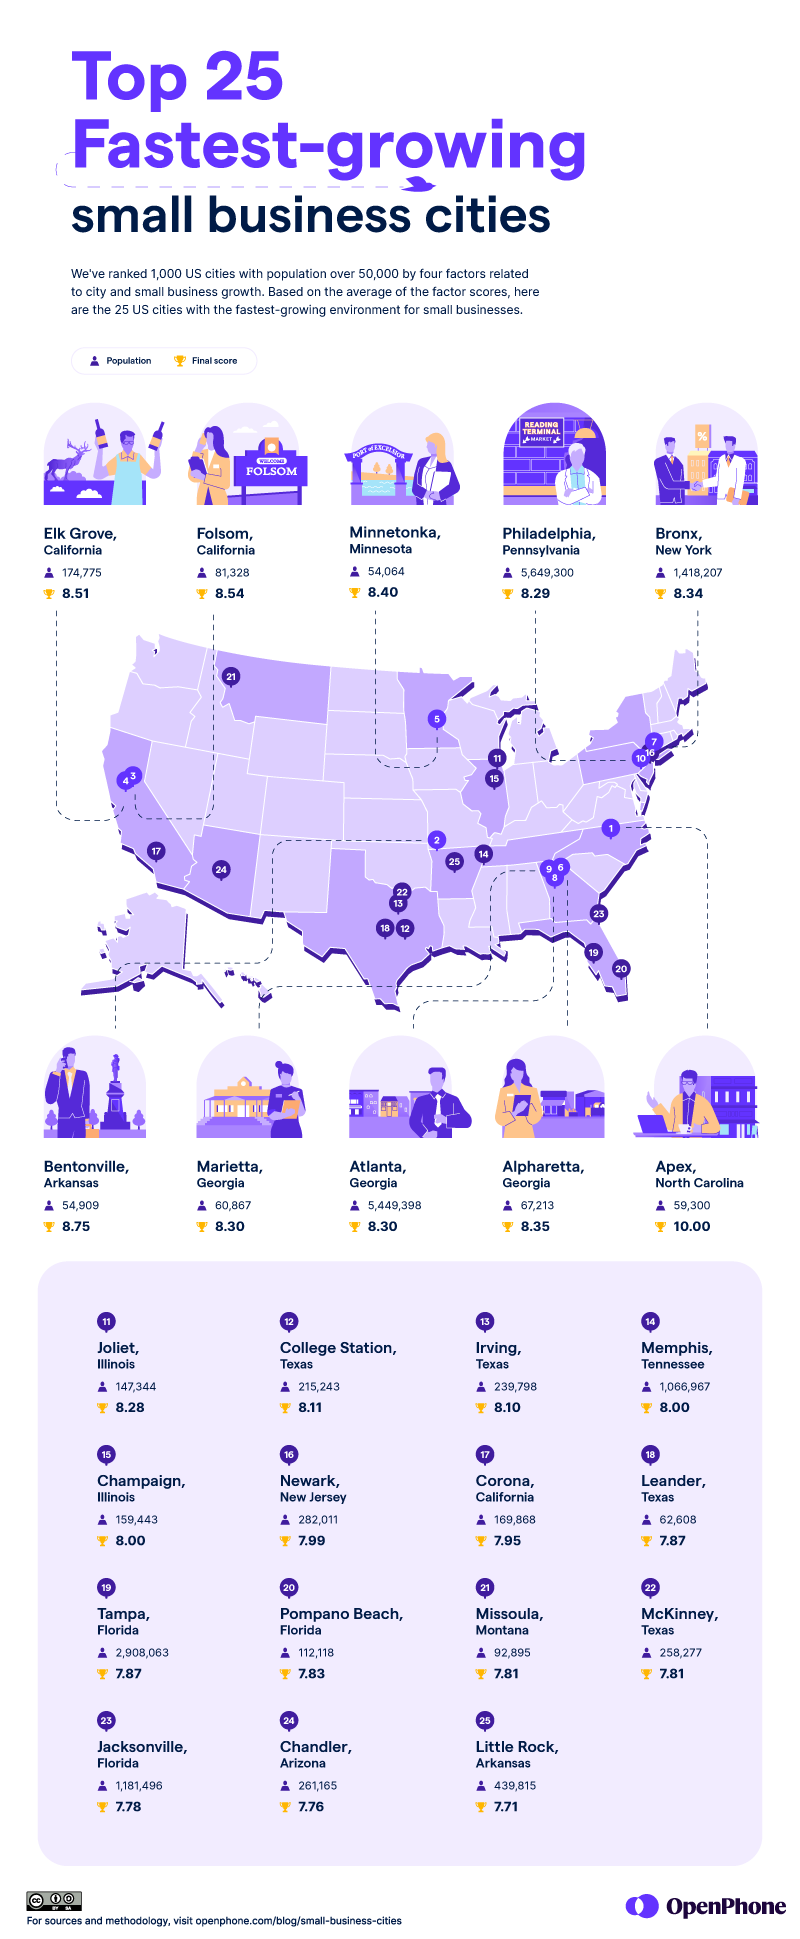 FastestGrowing Cities in America for Small Businesses